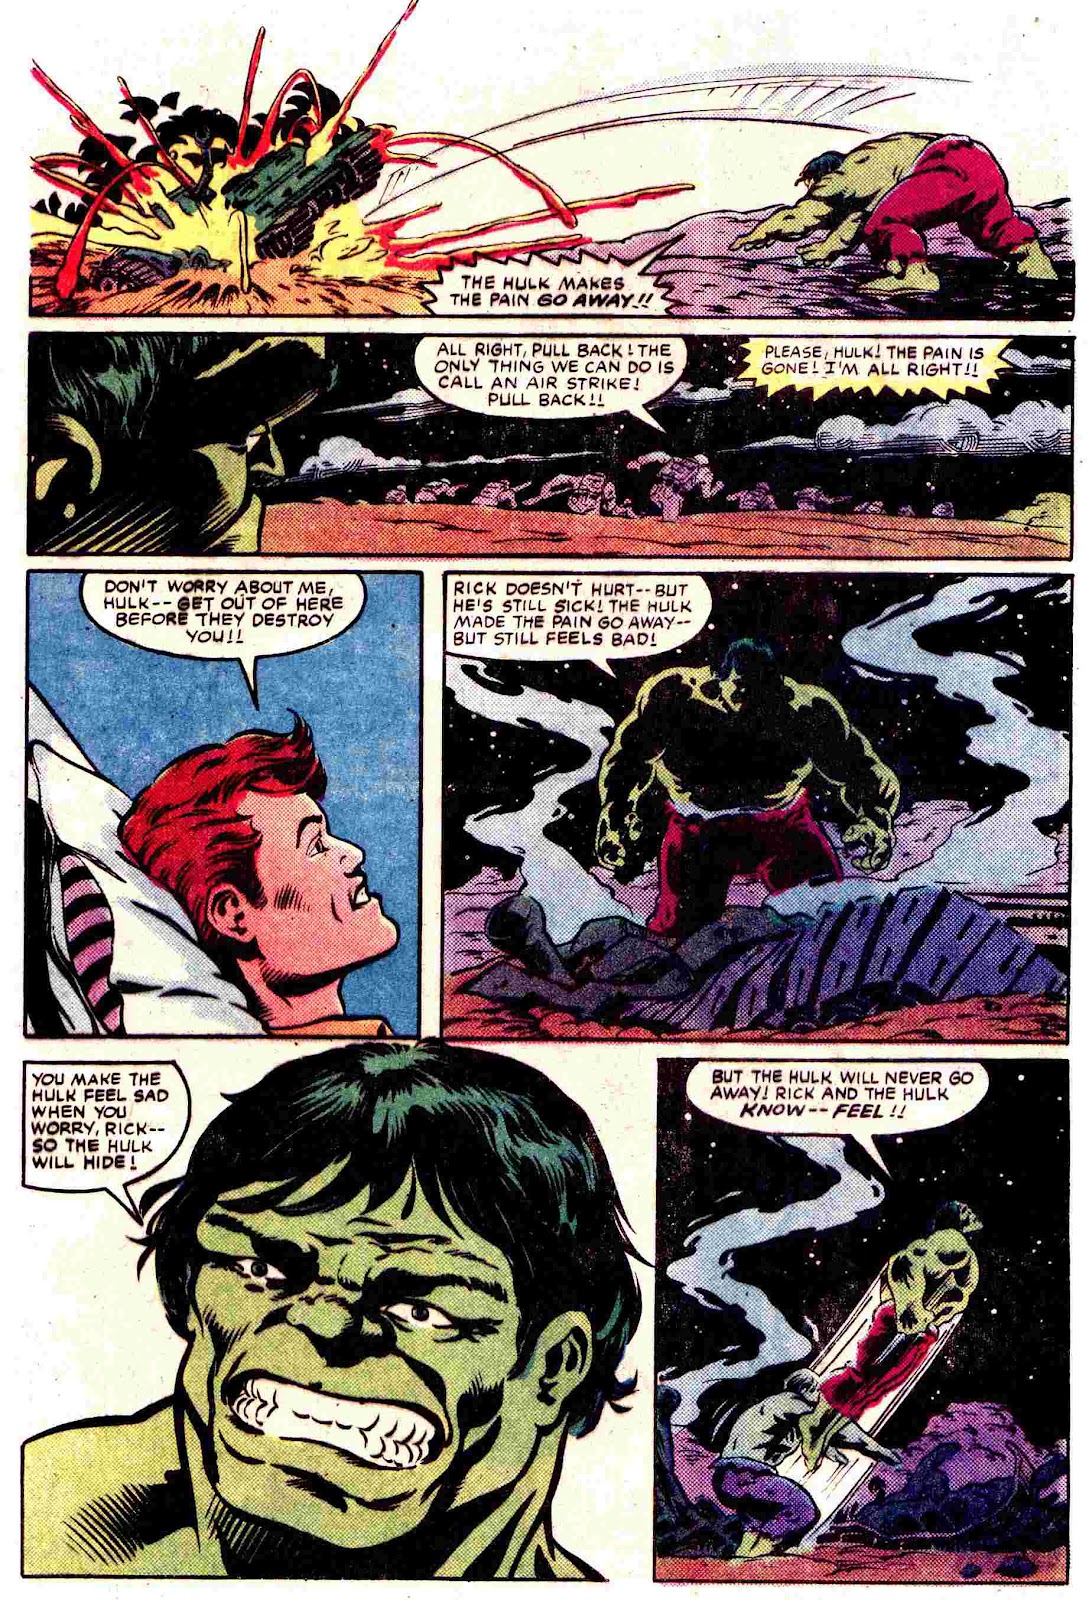 What If? (1977) issue 45 - The Hulk went Berserk - Page 15